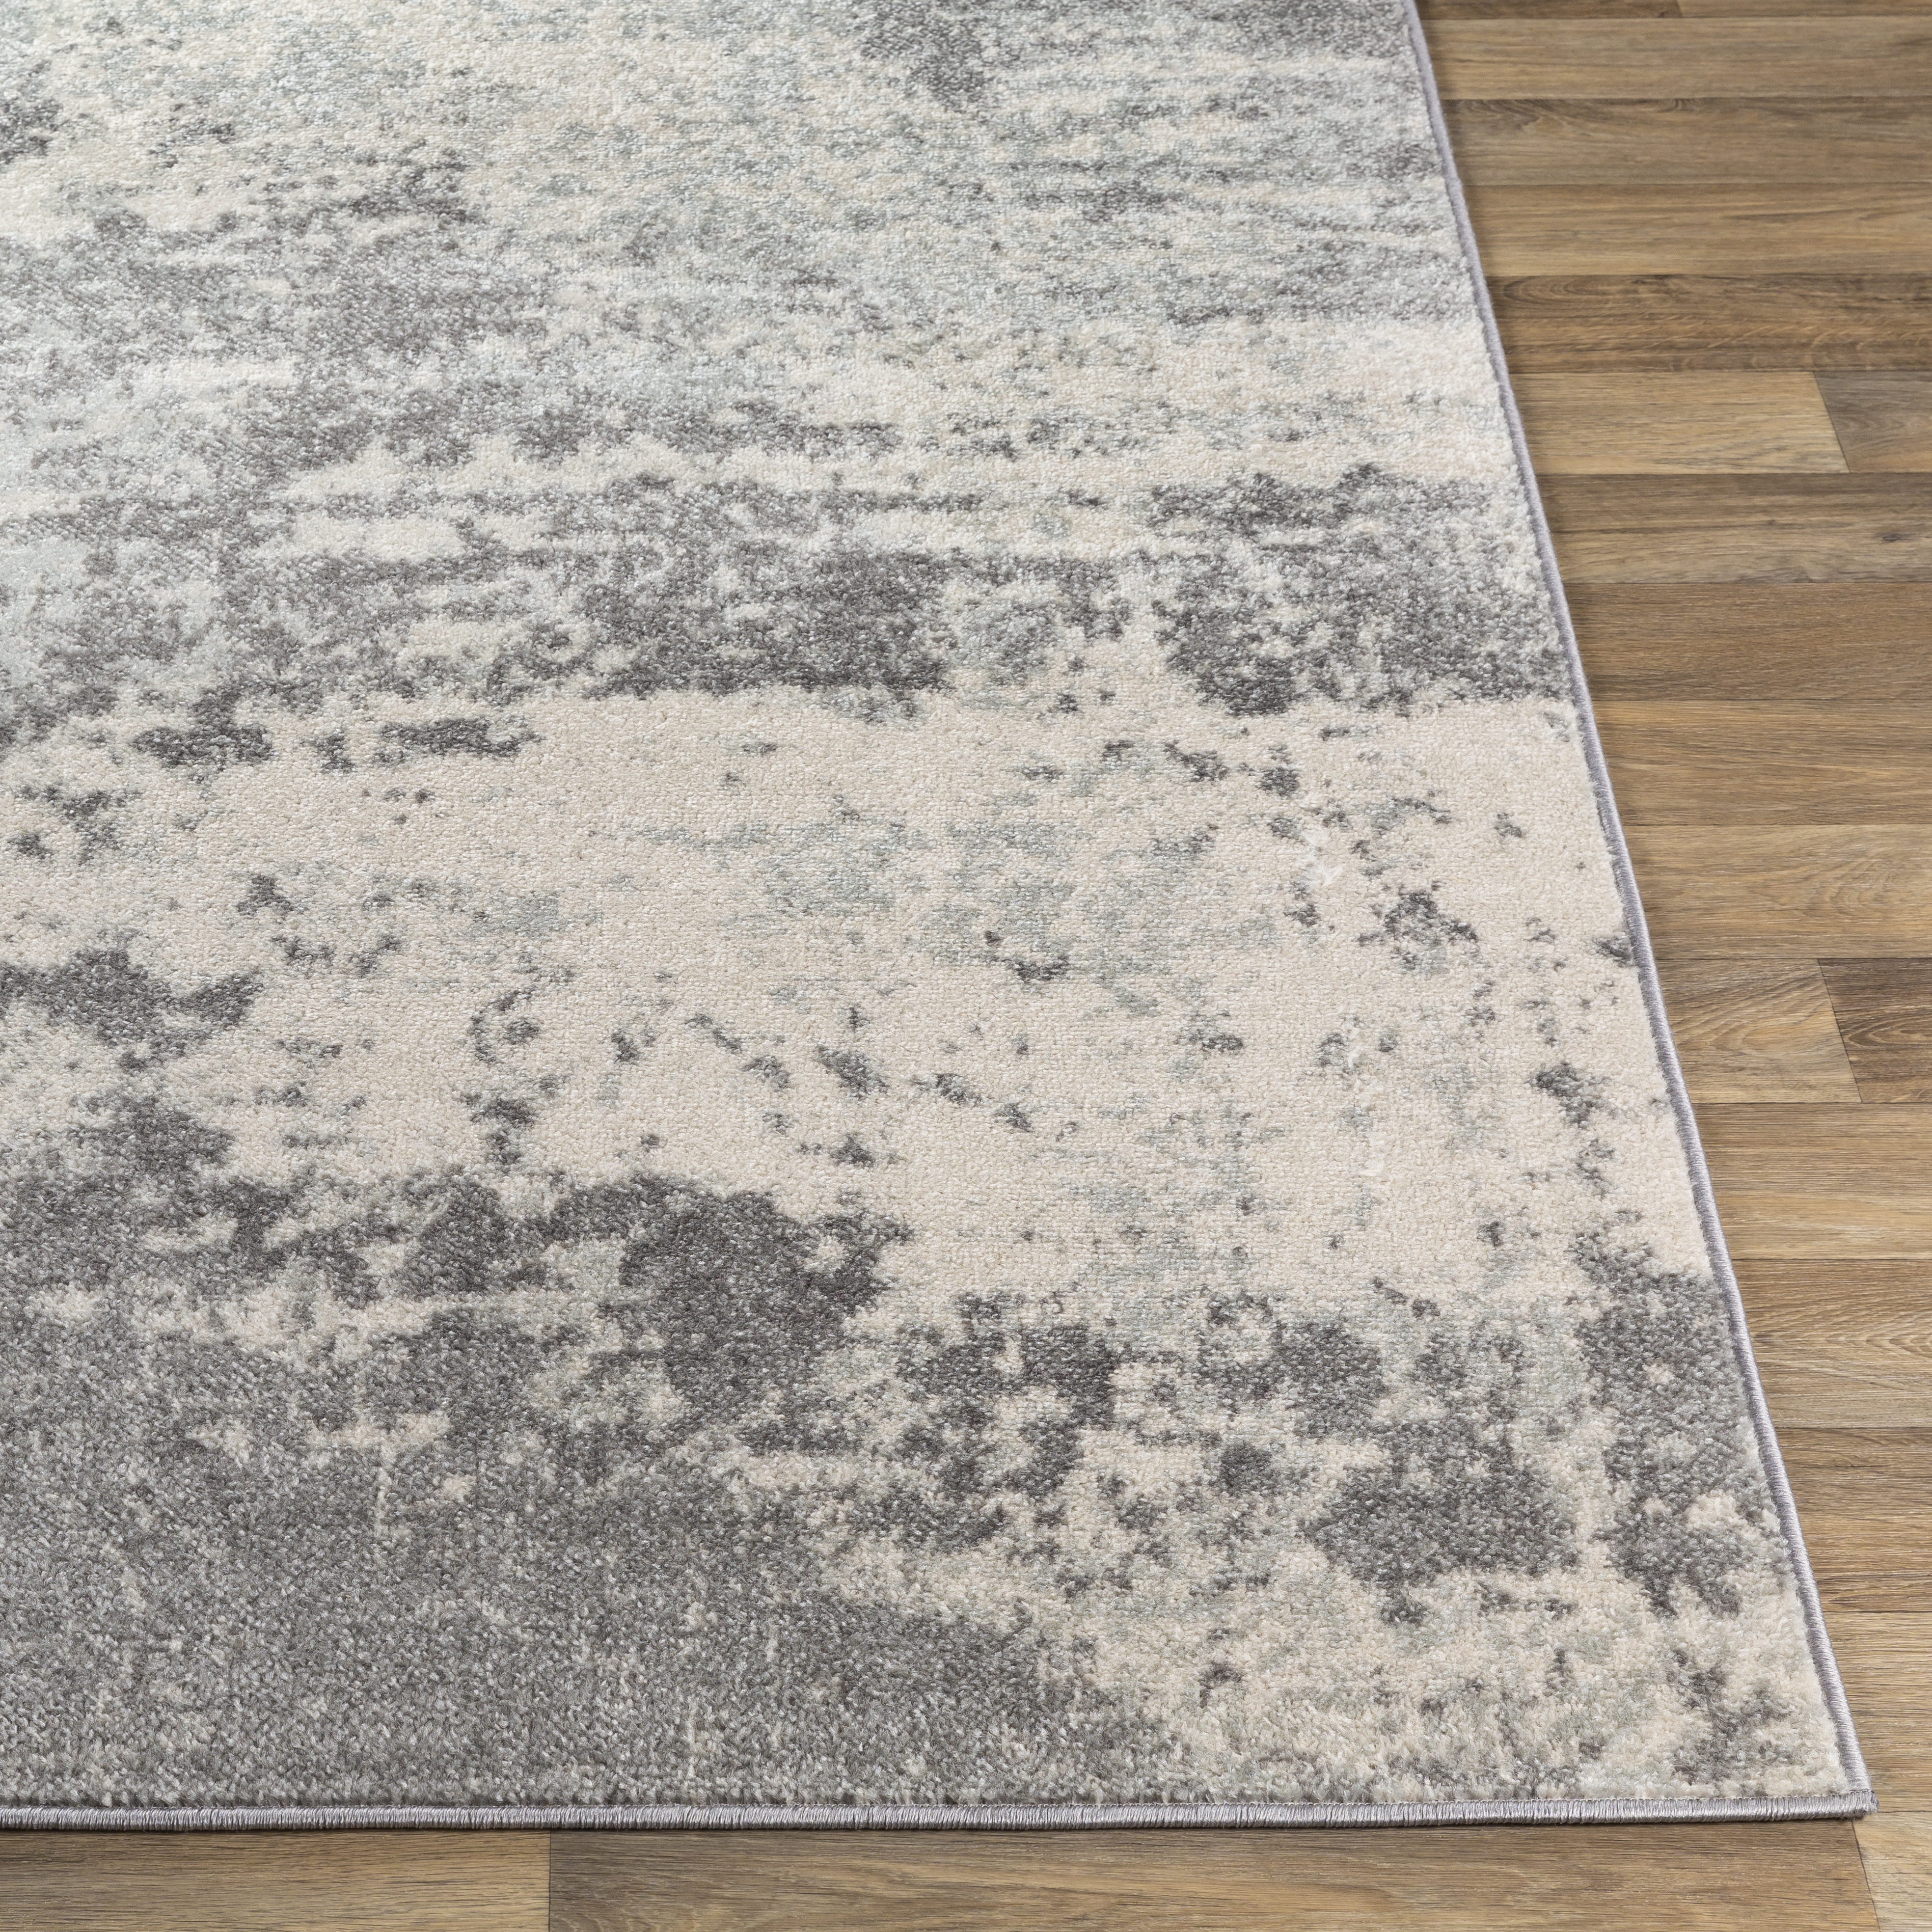 Chester Rug, 6'7" x 9' - Image 2